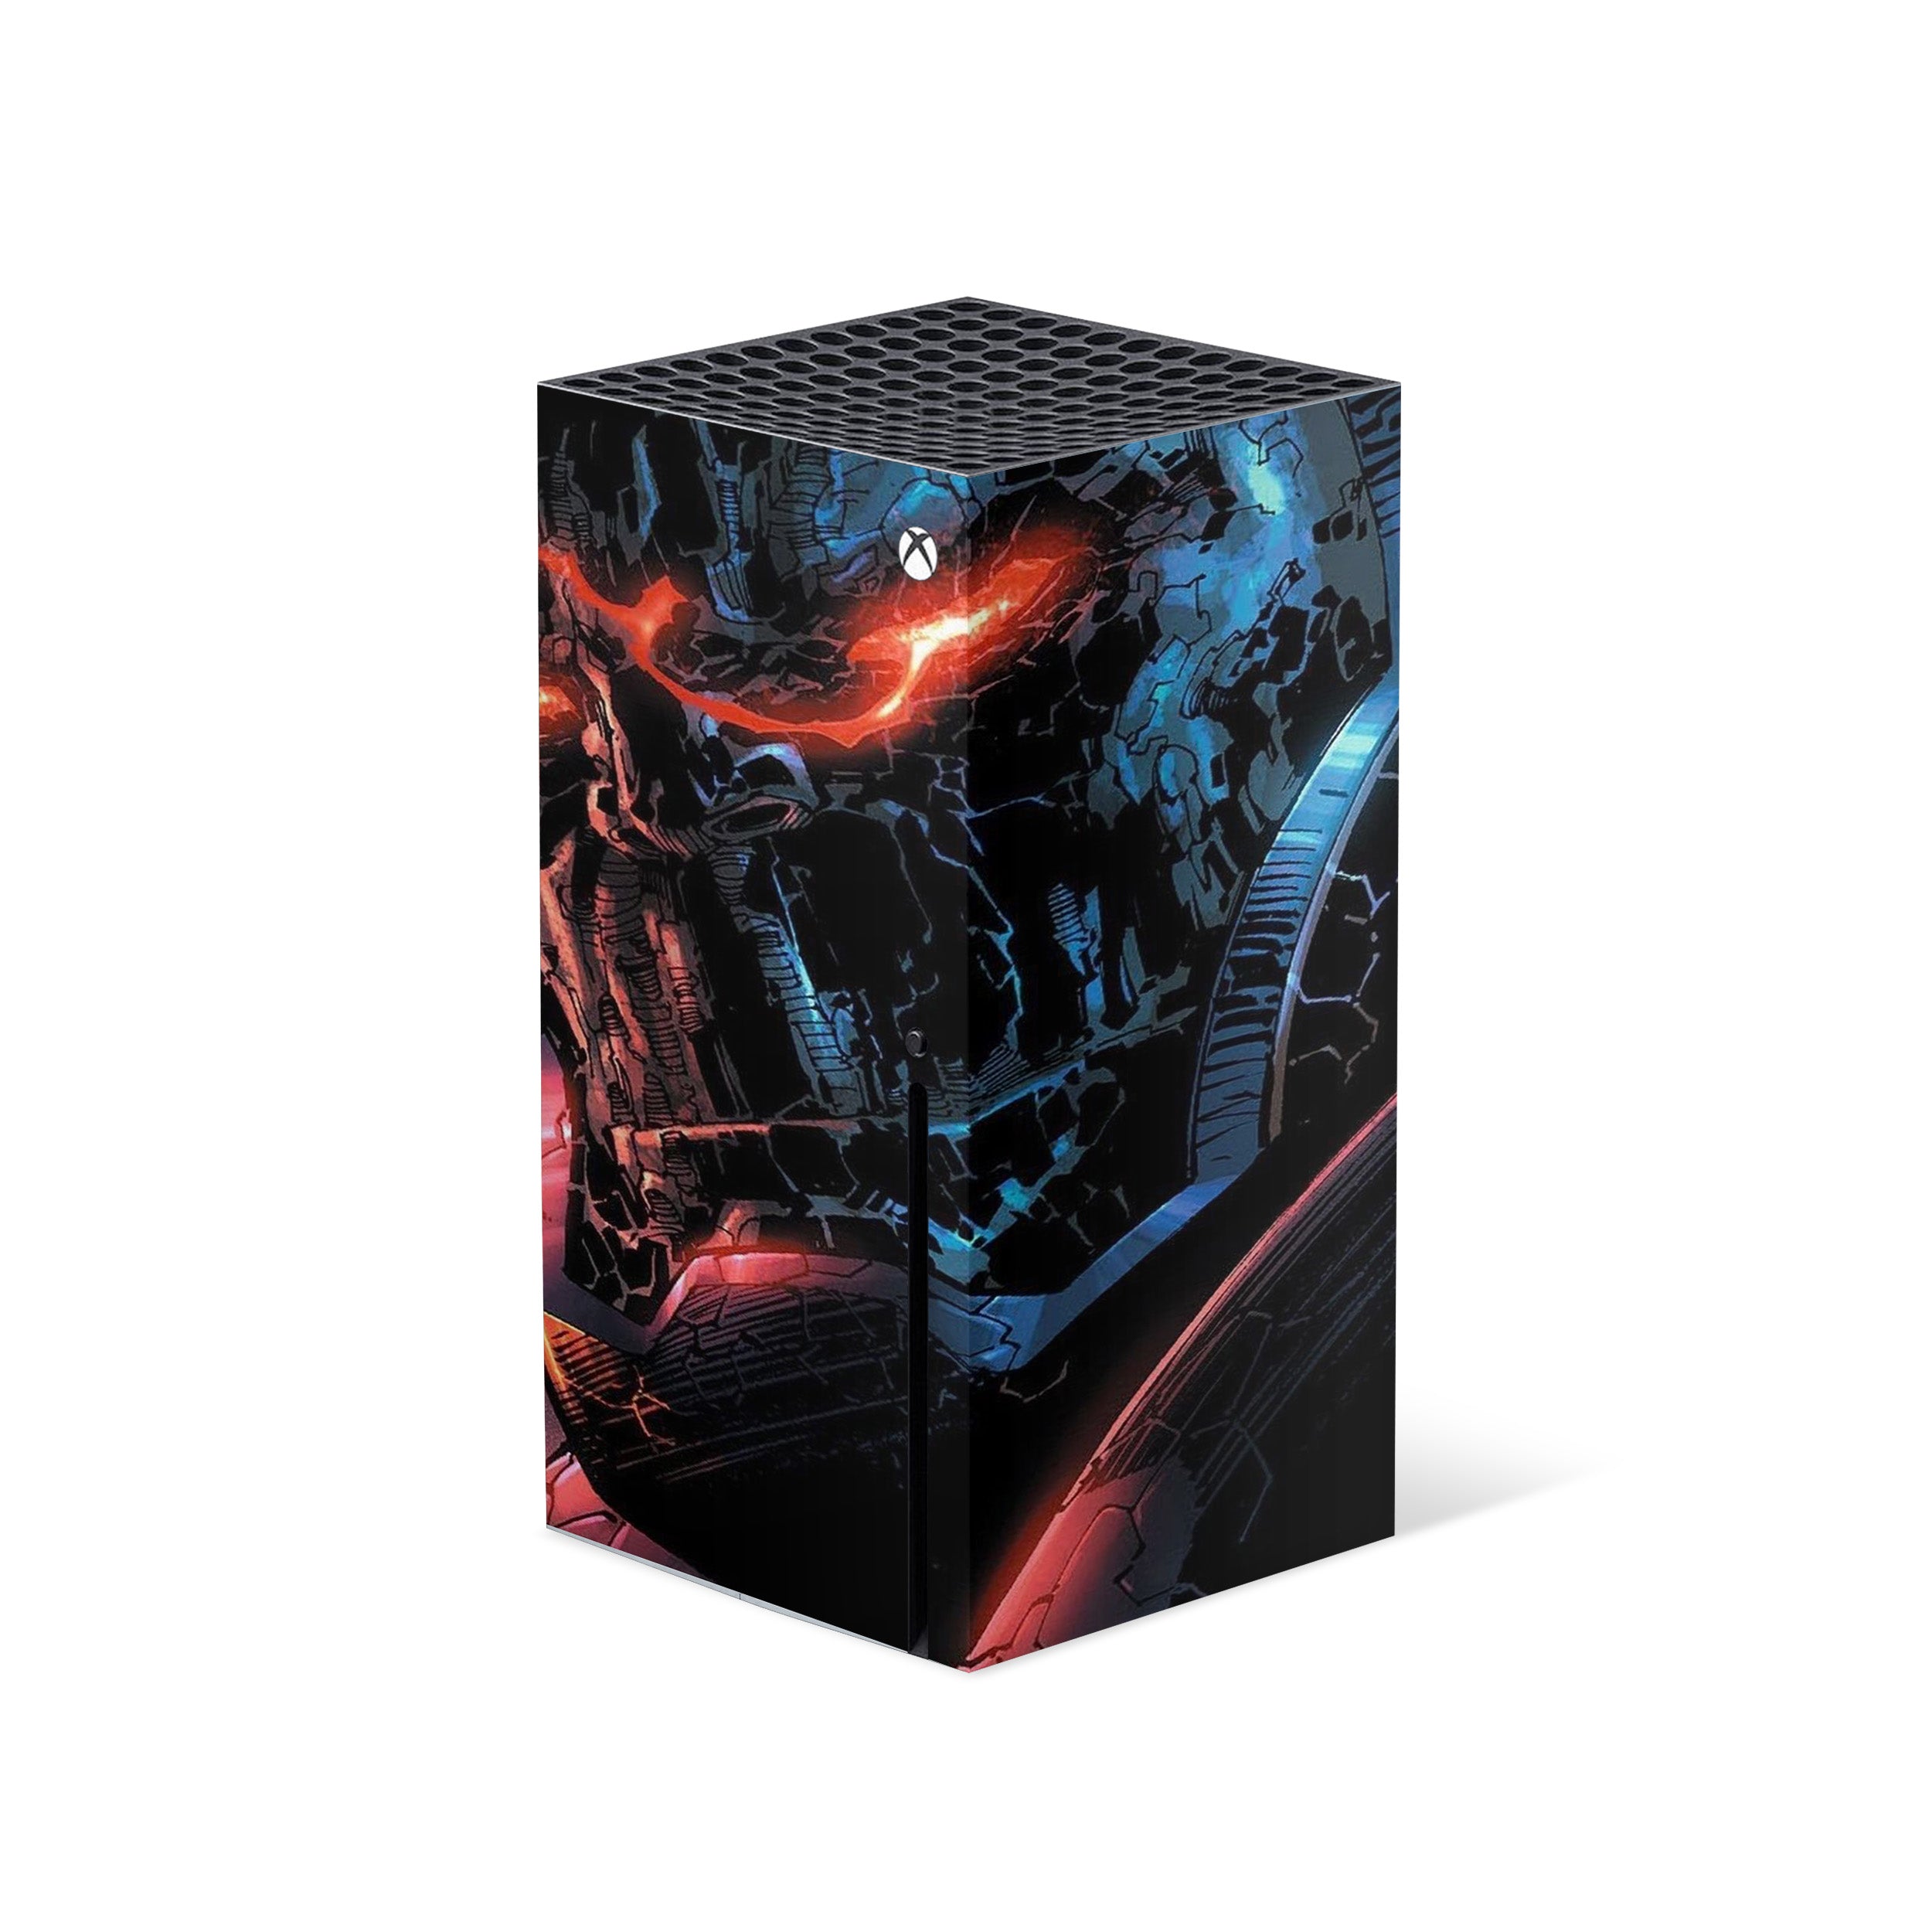 A video game skin featuring a DC Darkseid design for the Xbox Series X.